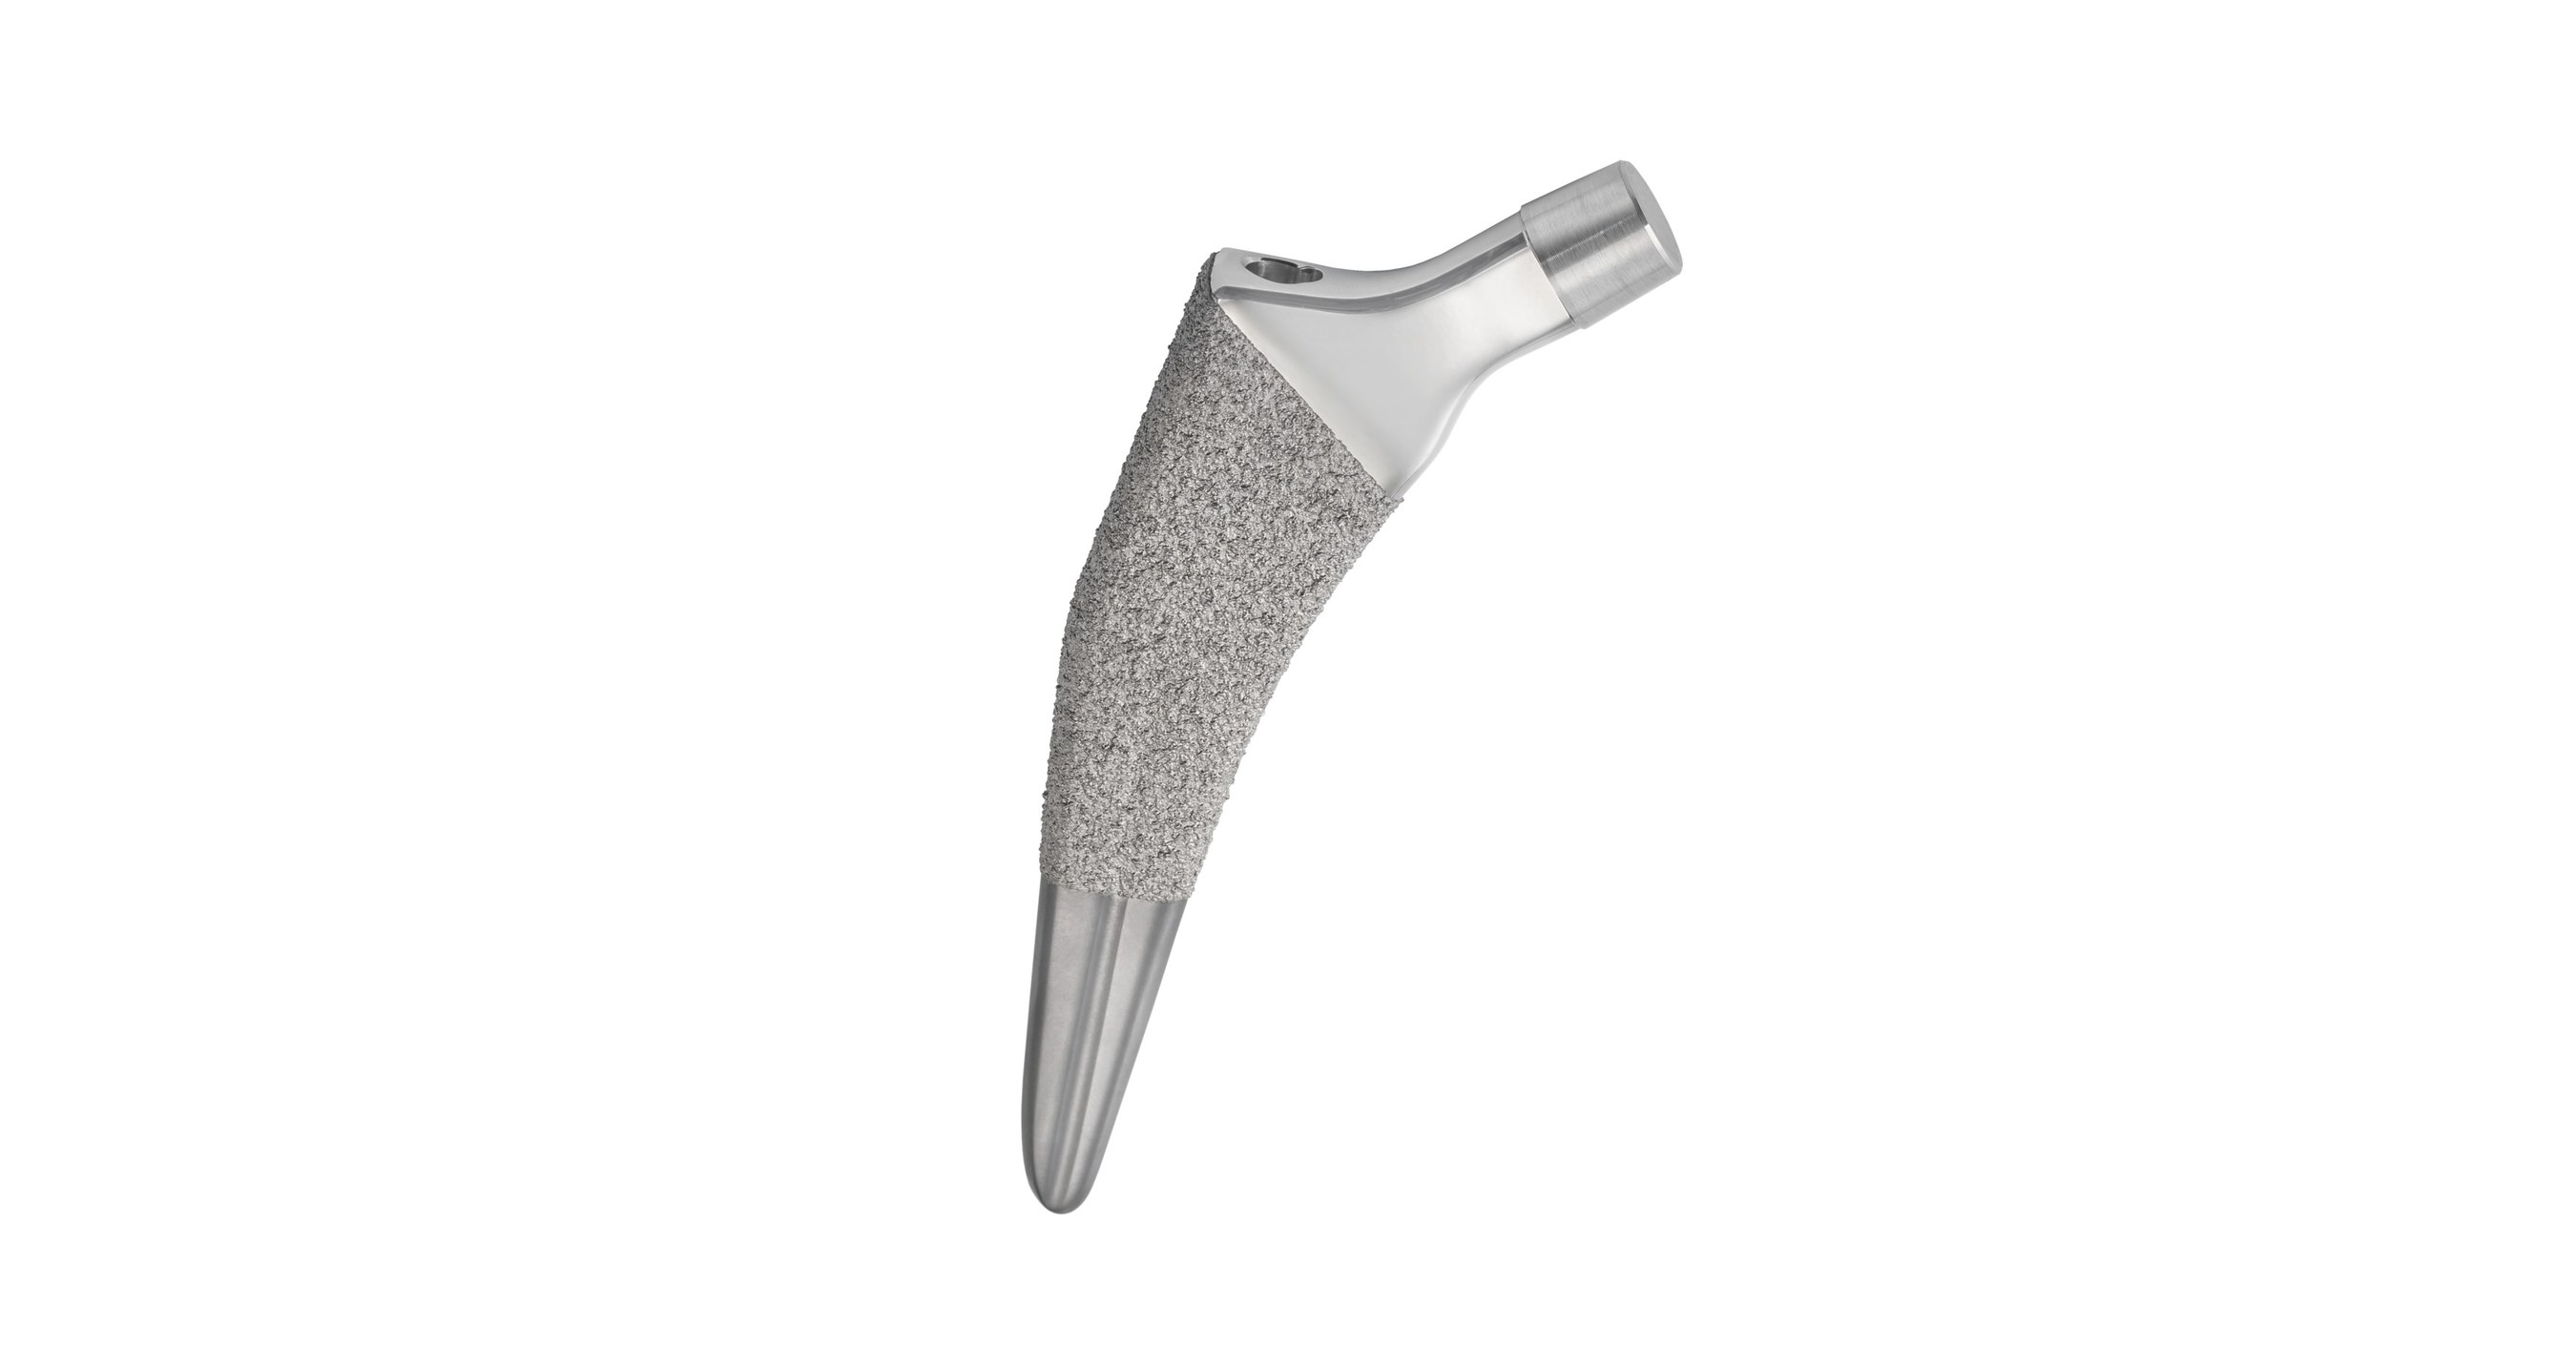 United Orthopedic Corporation Launches UTS™ Hip Stem and an Extension of  its U-Motion II™ Acetabular System at the American Academy of Orthopaedic  Surgeons Annual Meeting